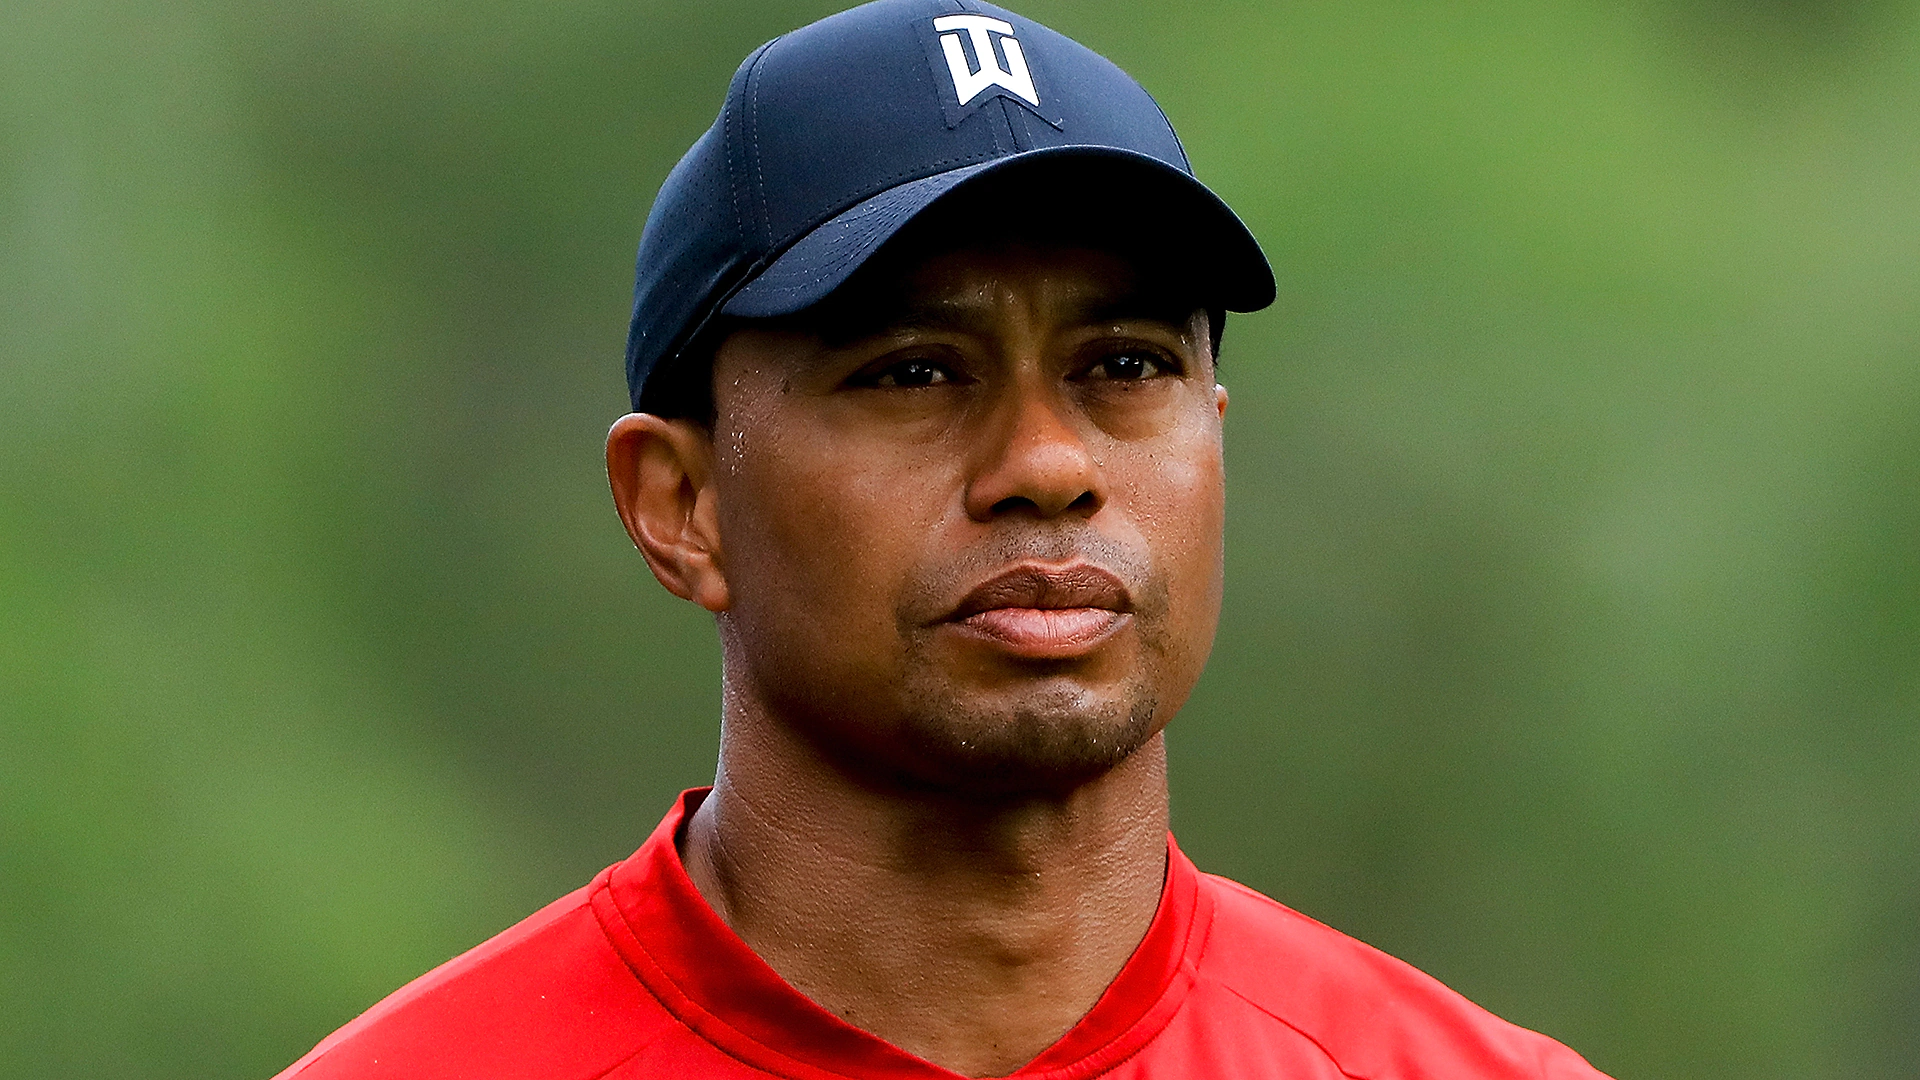 Tiger's new tune-up: Limited prep at Bay Hill